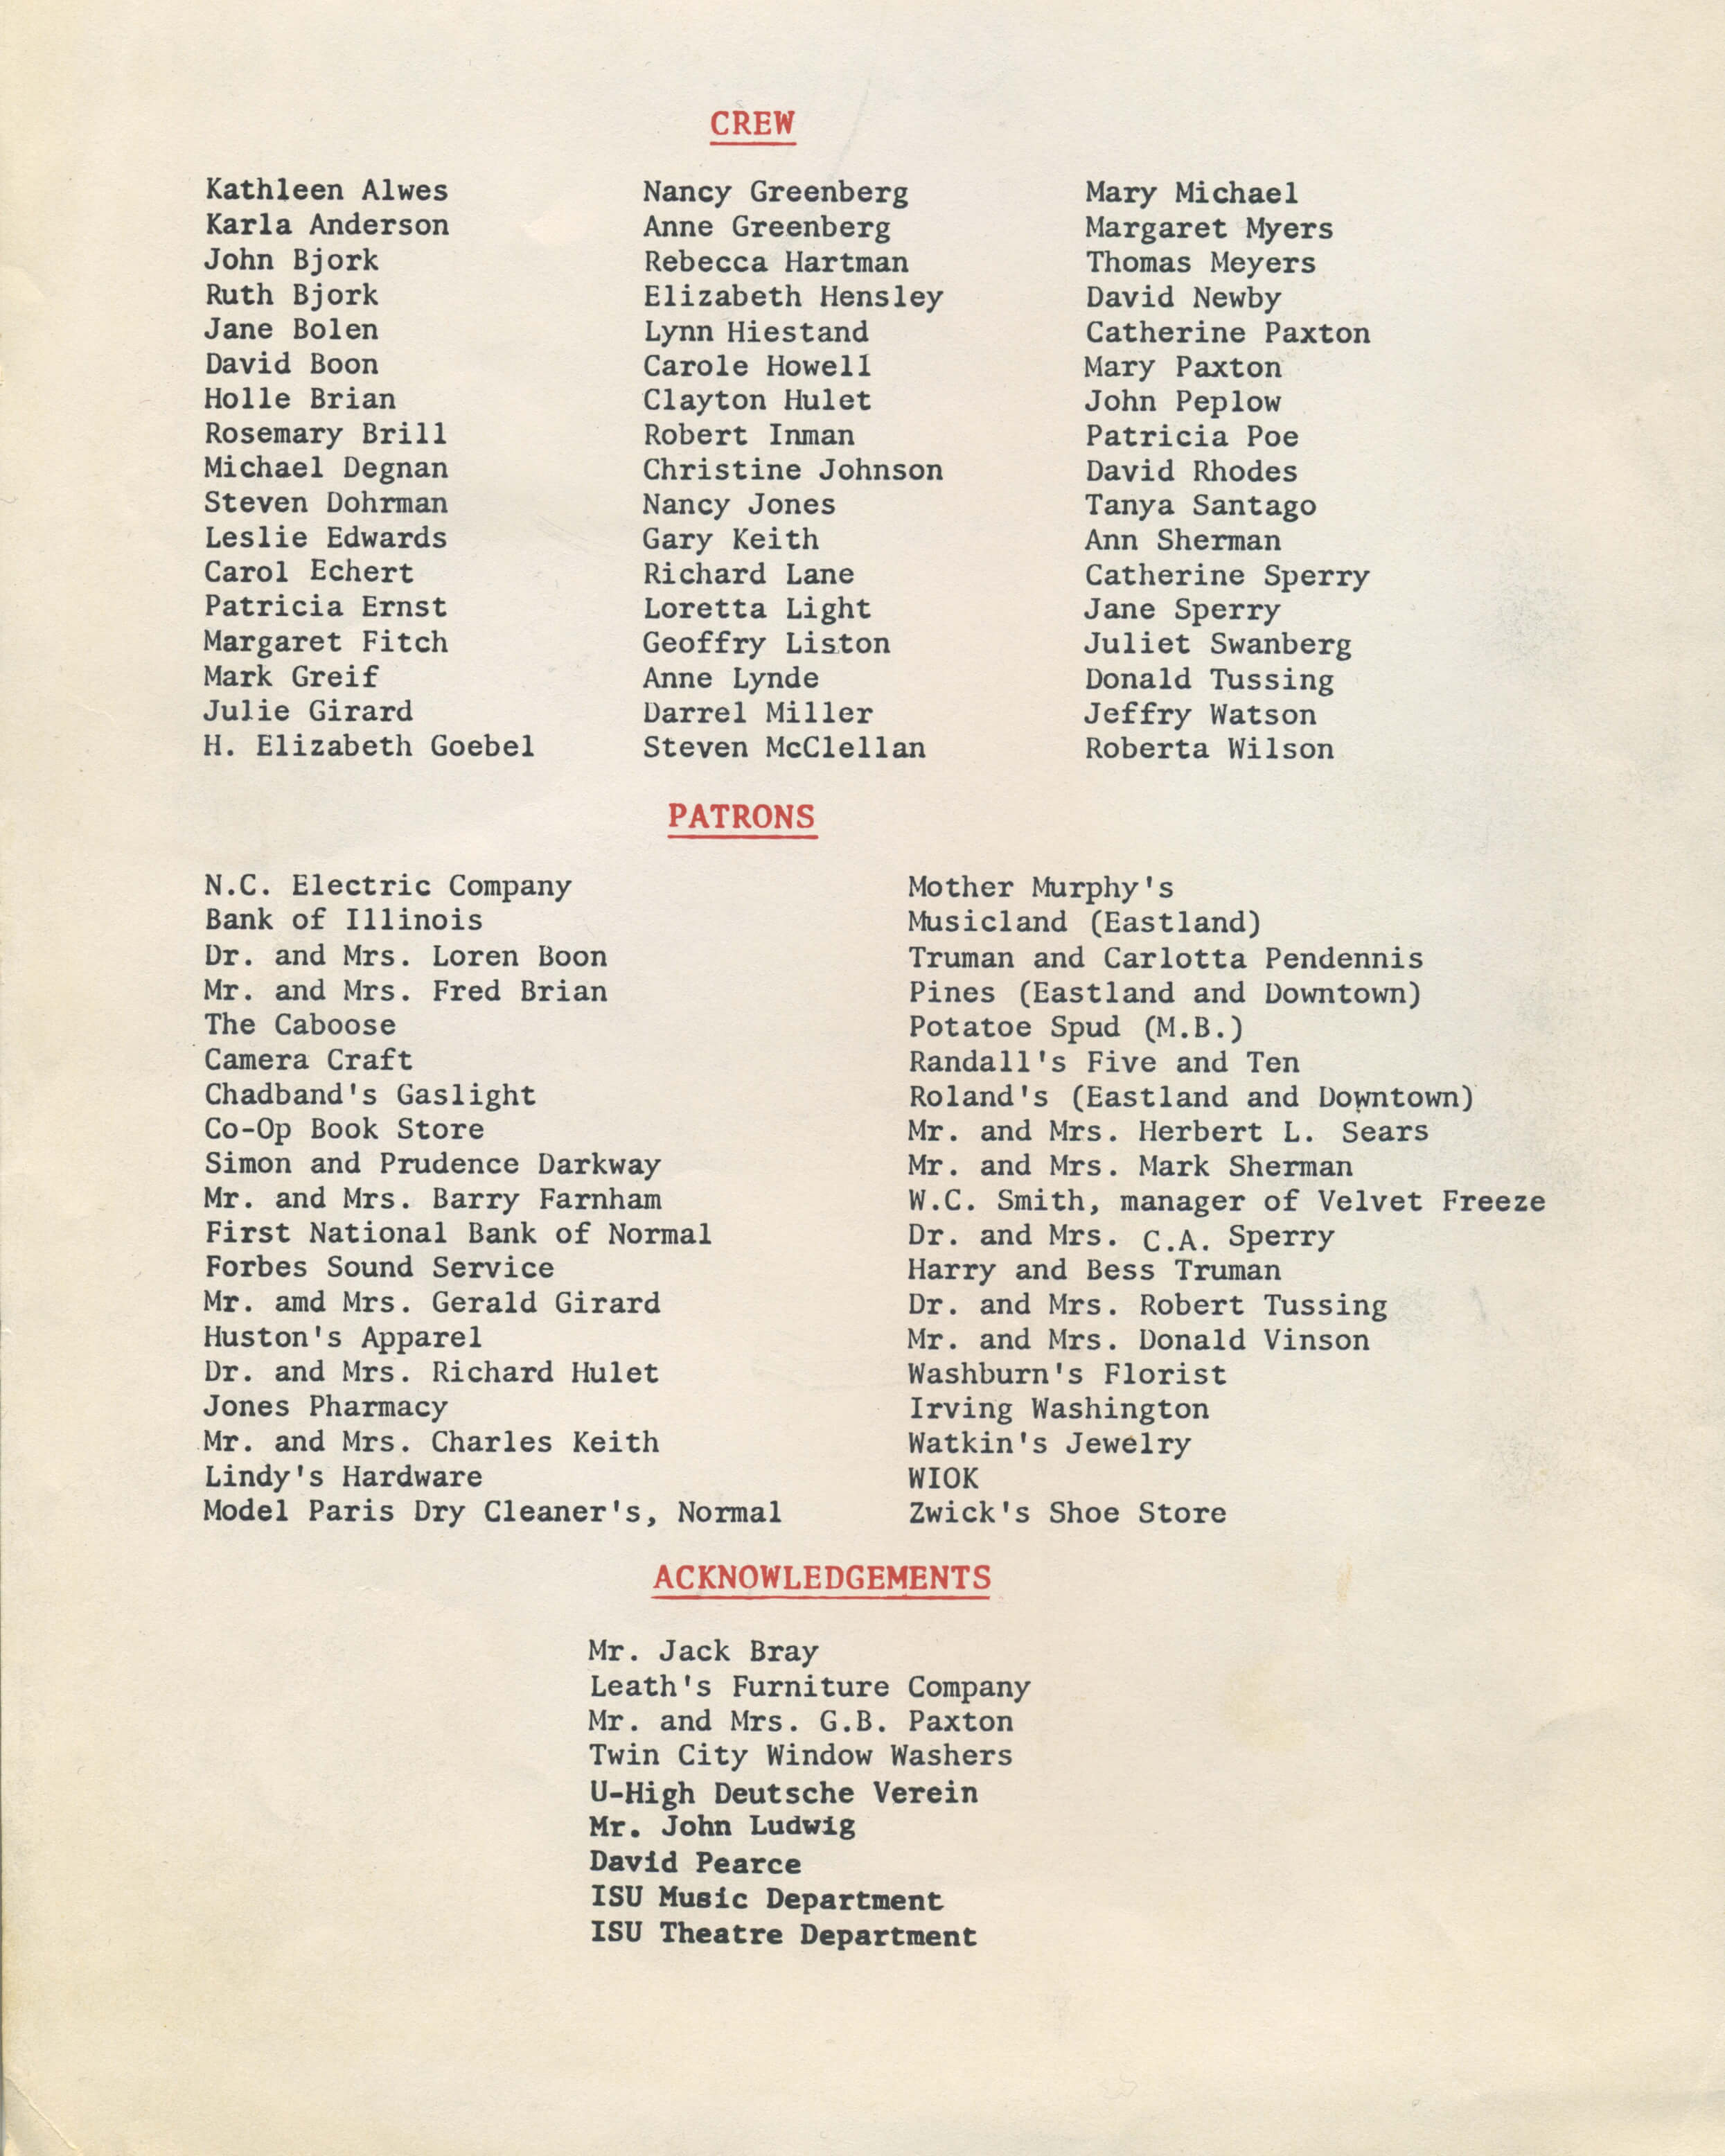 Back cover of a high school play bill. Crew, Patrons, and Acknowledgements.